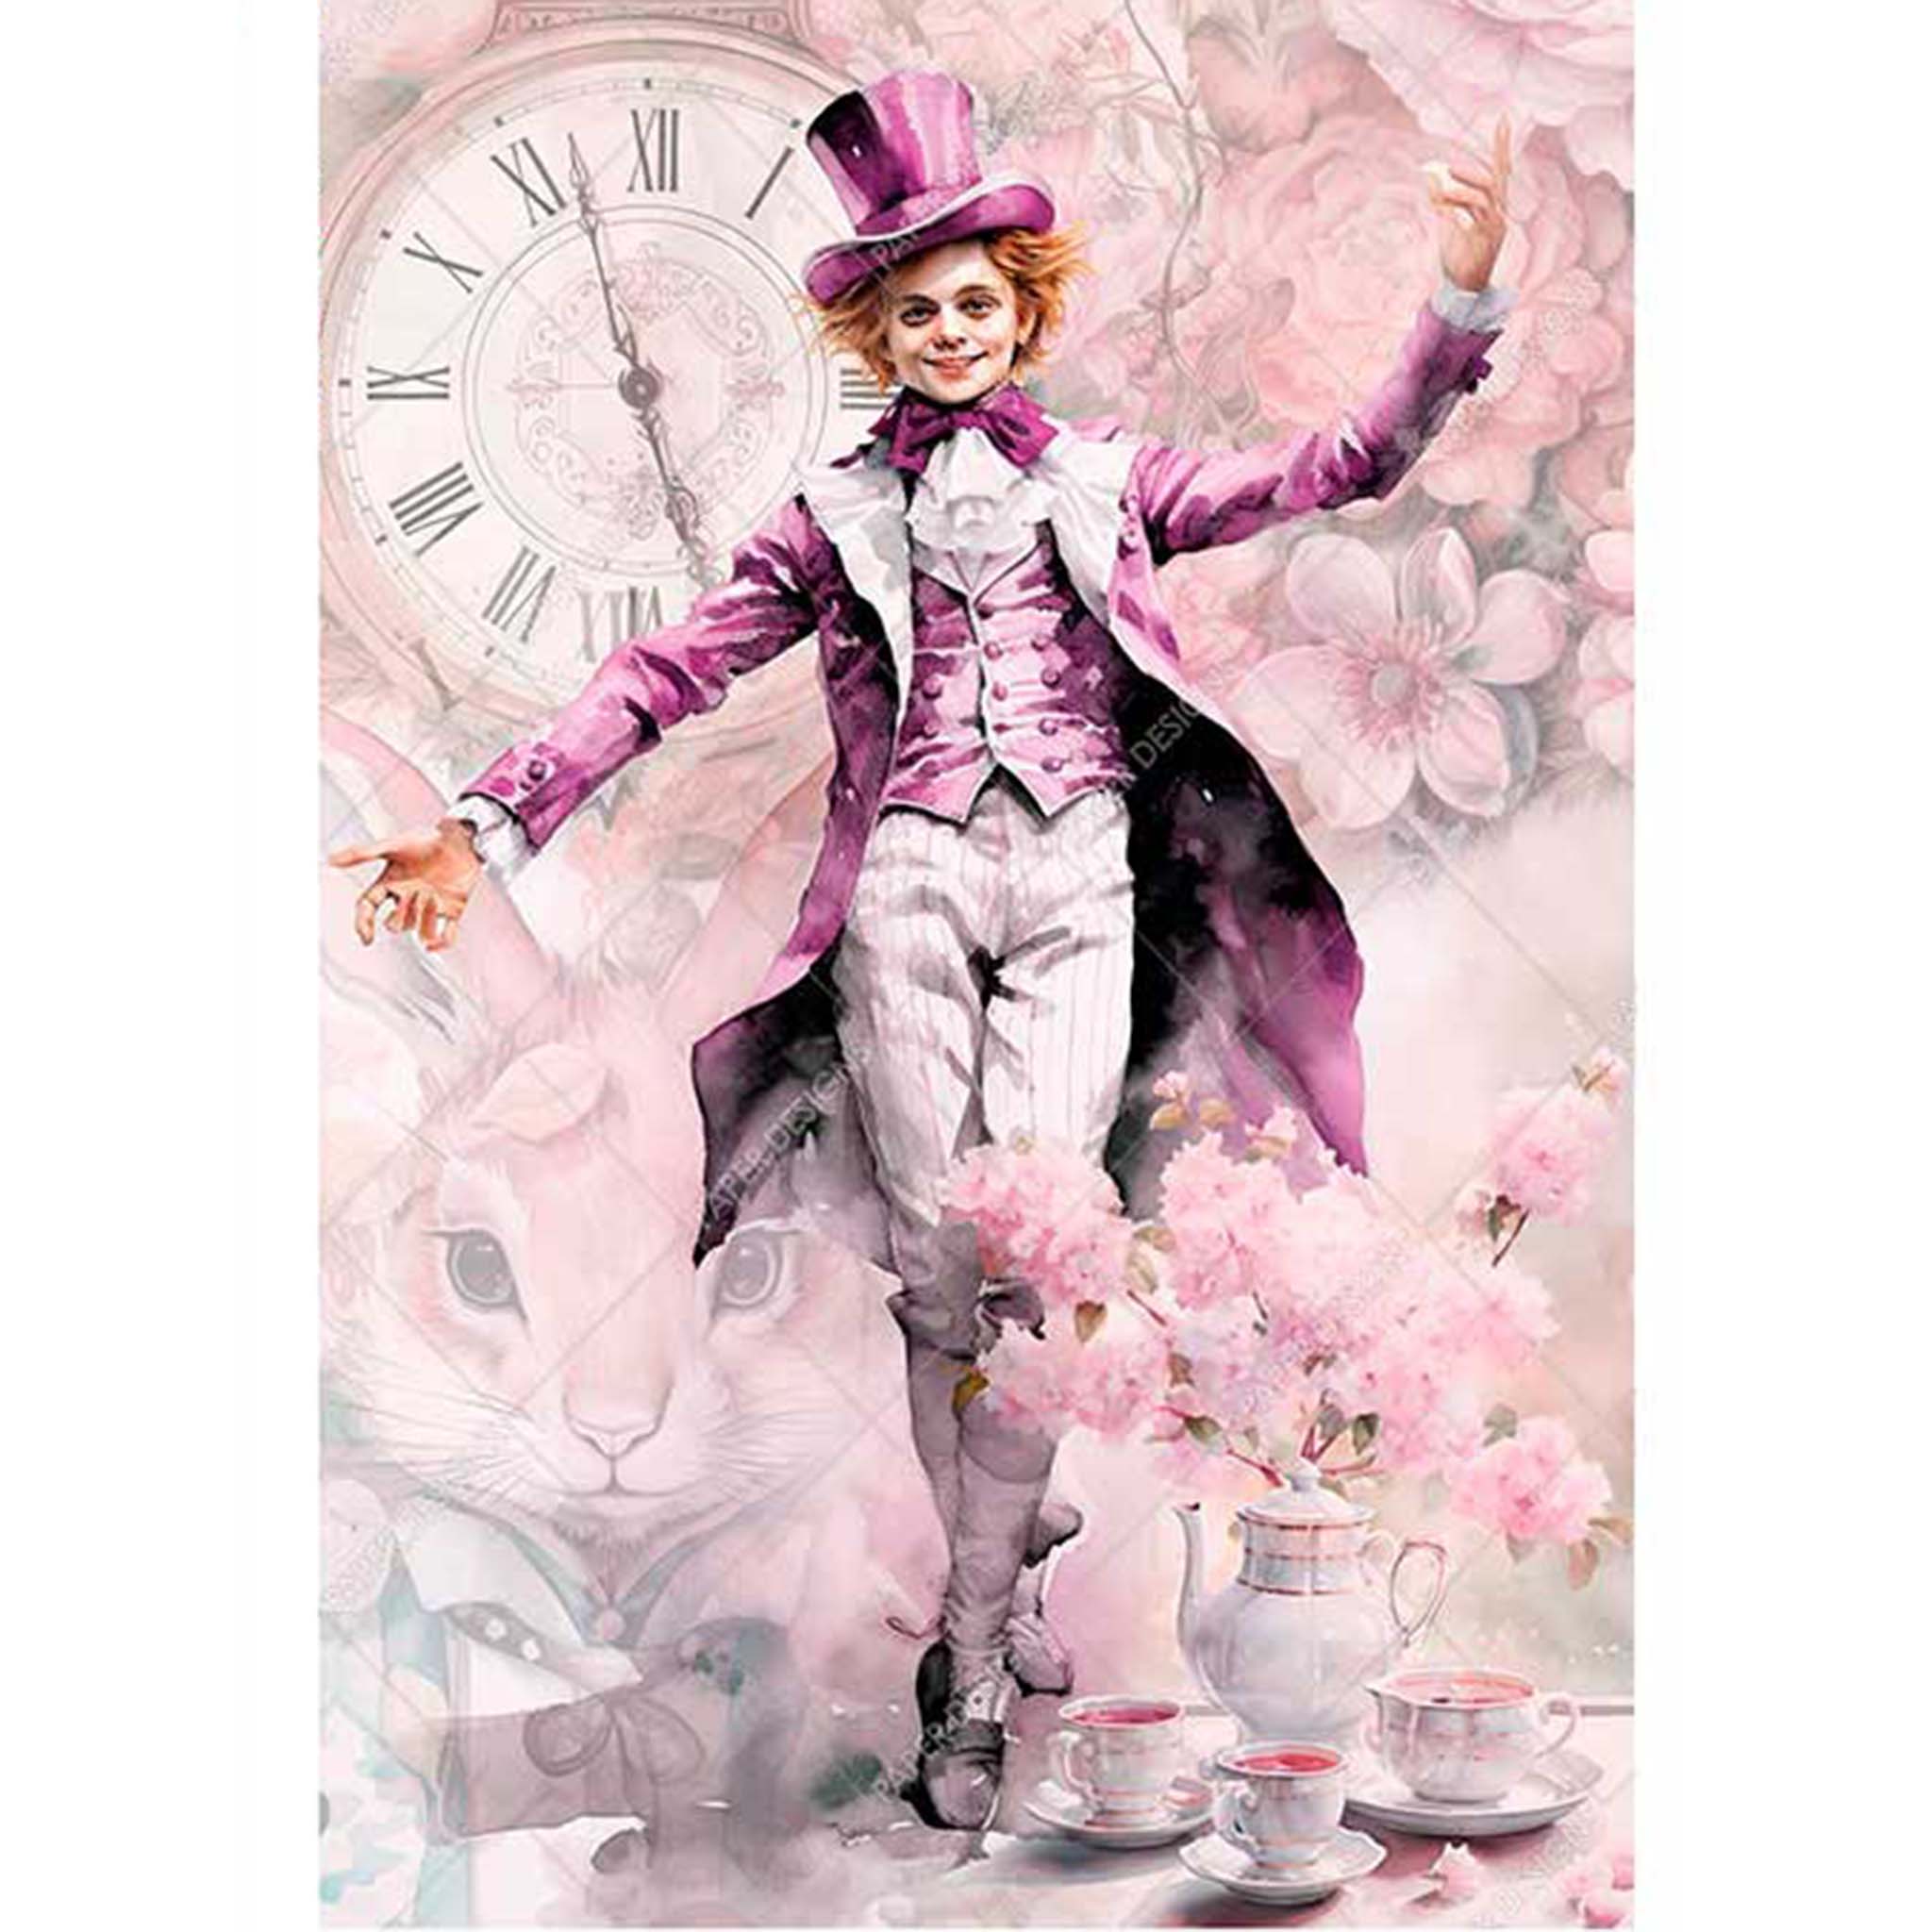 A3 rice paper design featuring The Mad Hatter and a tea set against a large clock face and rabit face in front of a pink floral background. White borders are on the sides.